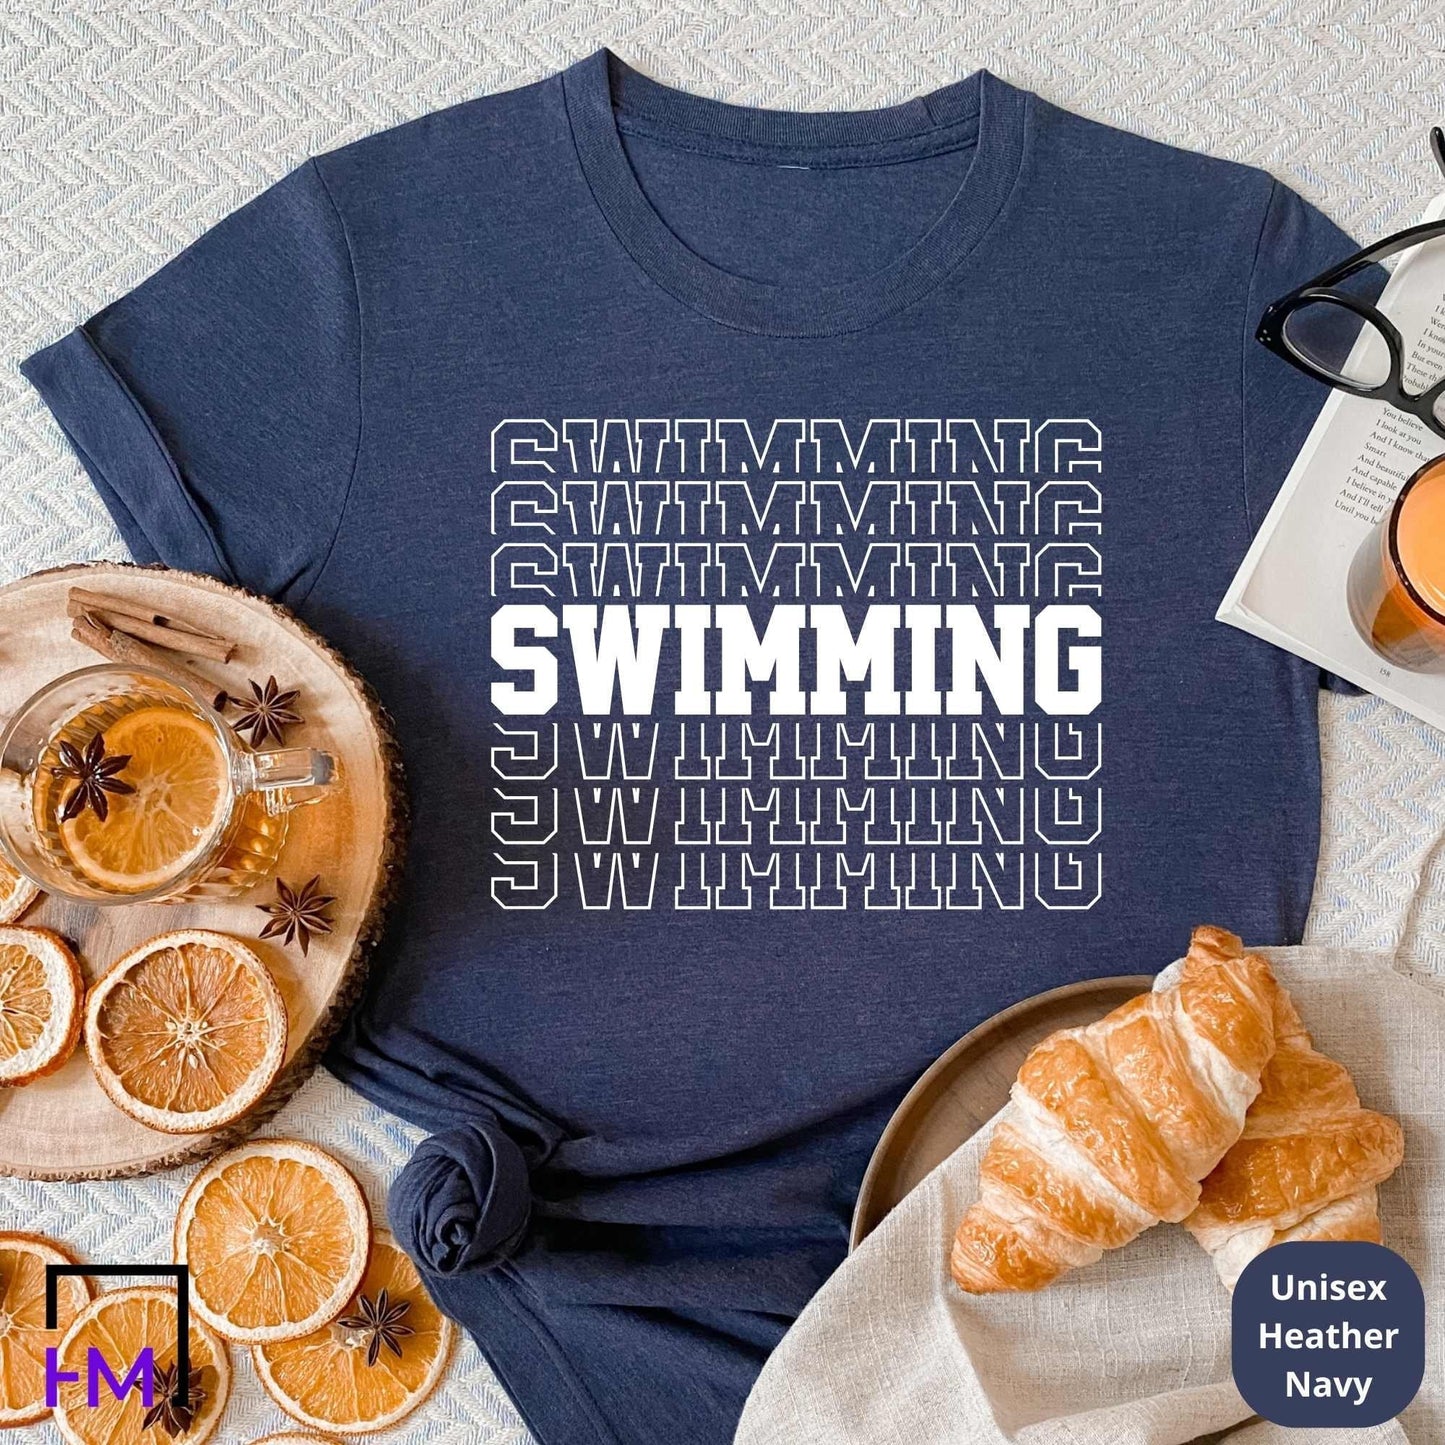 Swim in Style: Unique Swimming Themed T-Shirts for True Water Enthusiasts